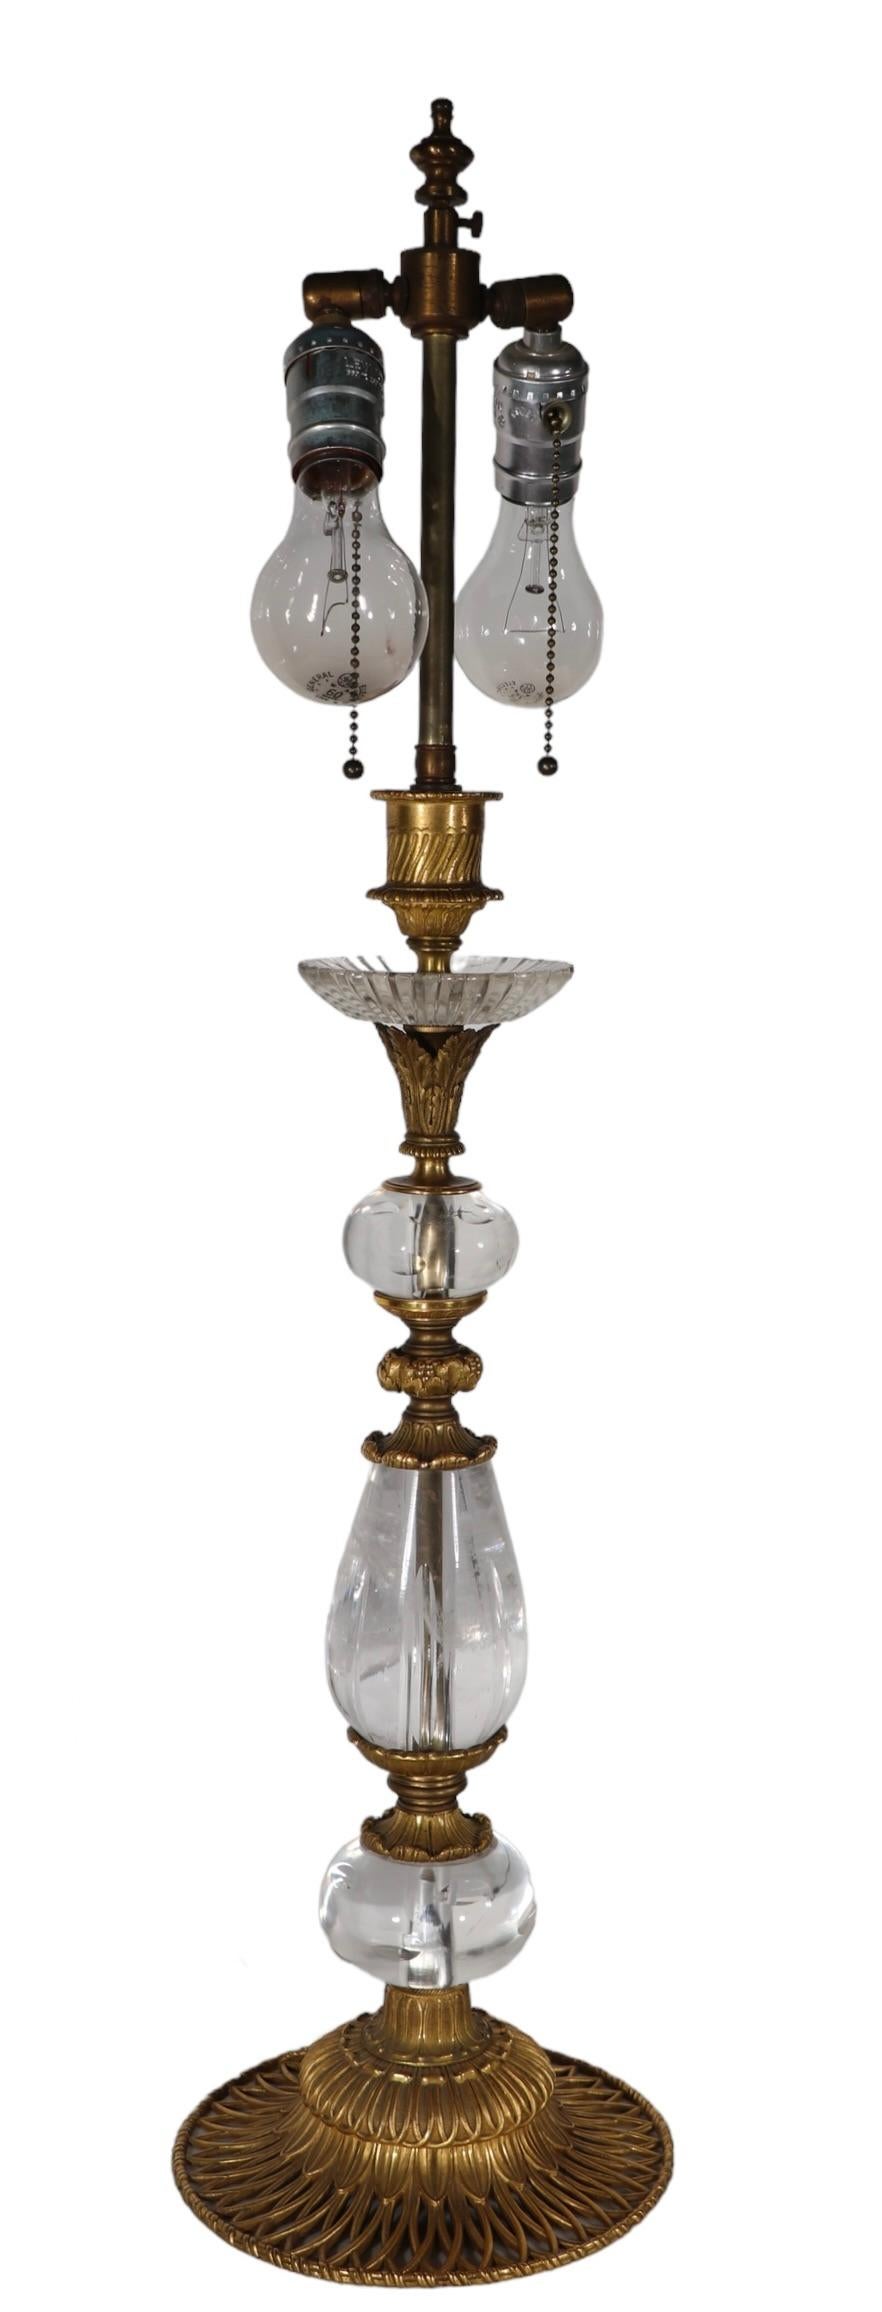   19th C French Bronze Ormolu and Rock Crystal Candlestick Table Lamp as is For Sale 4